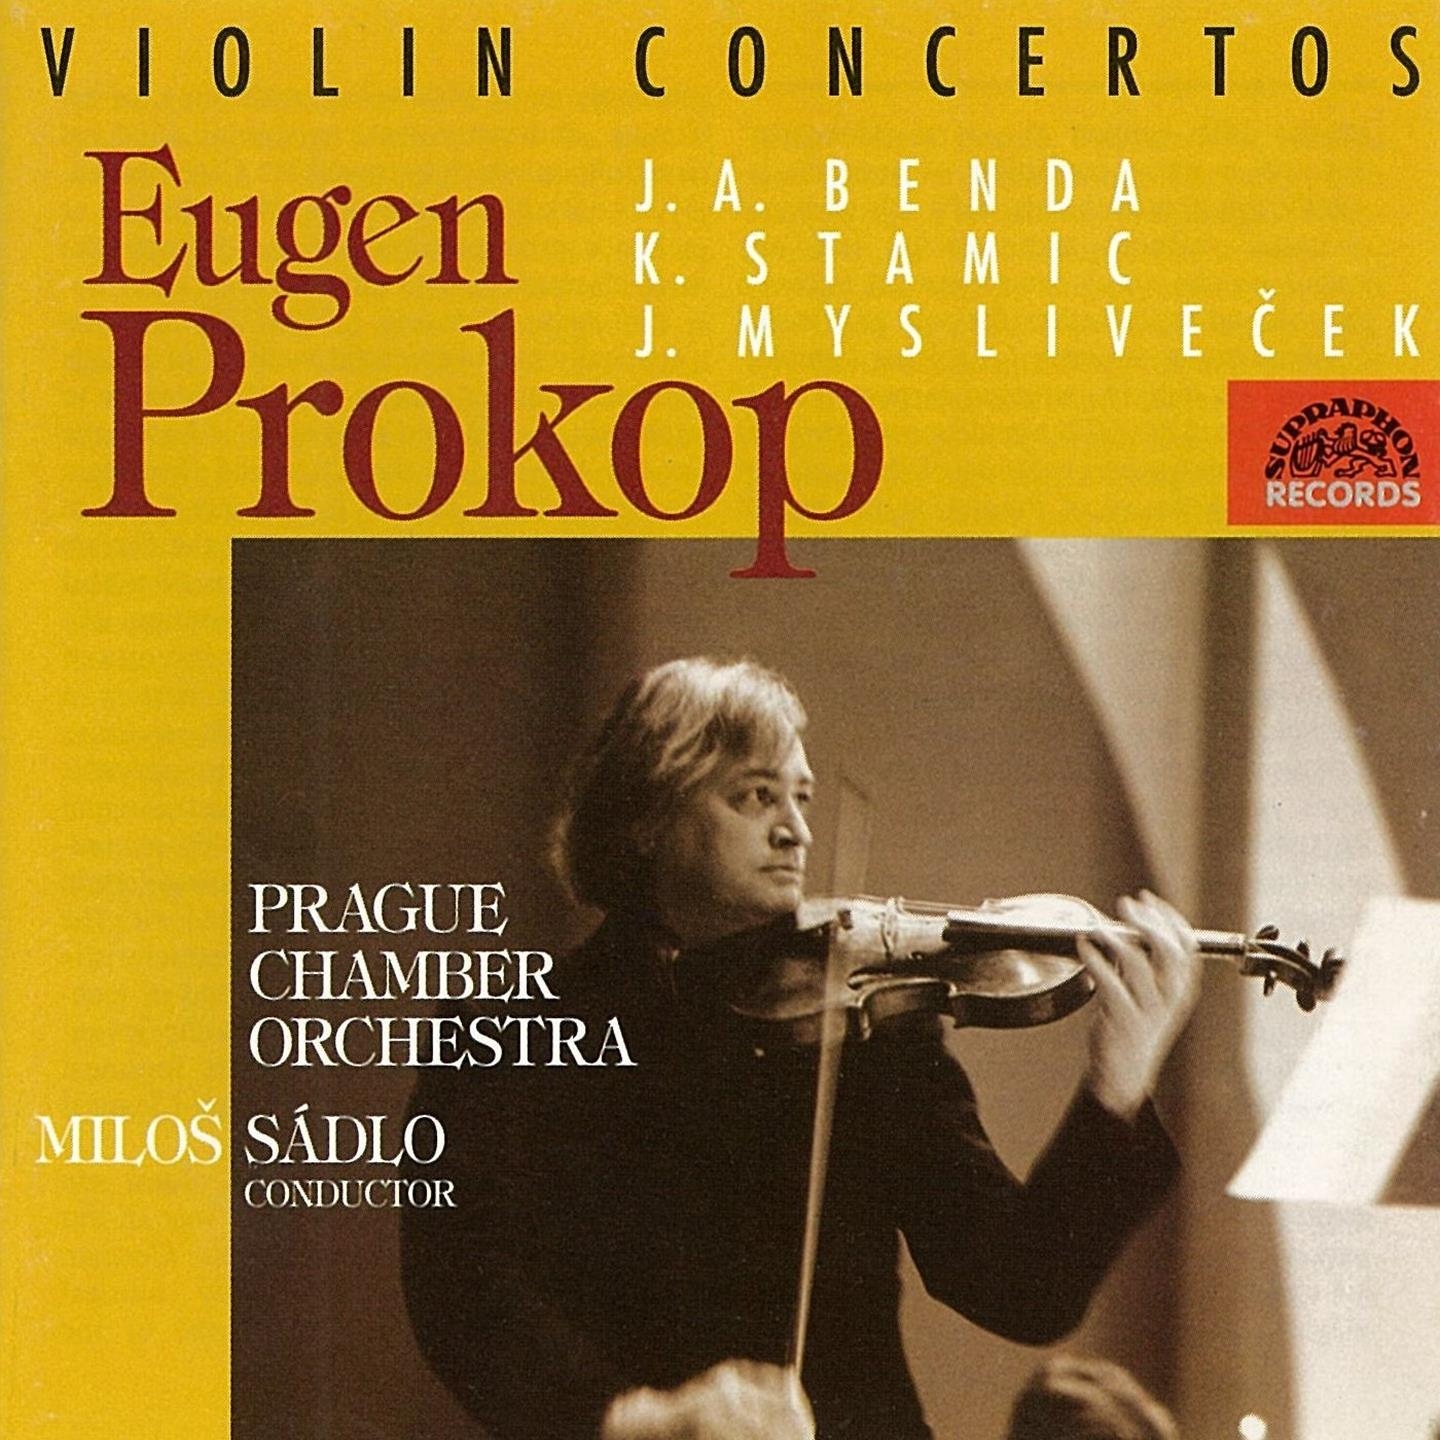 Concerto for Violin and Orchestra in B-Flat Major, .: I. Allegro